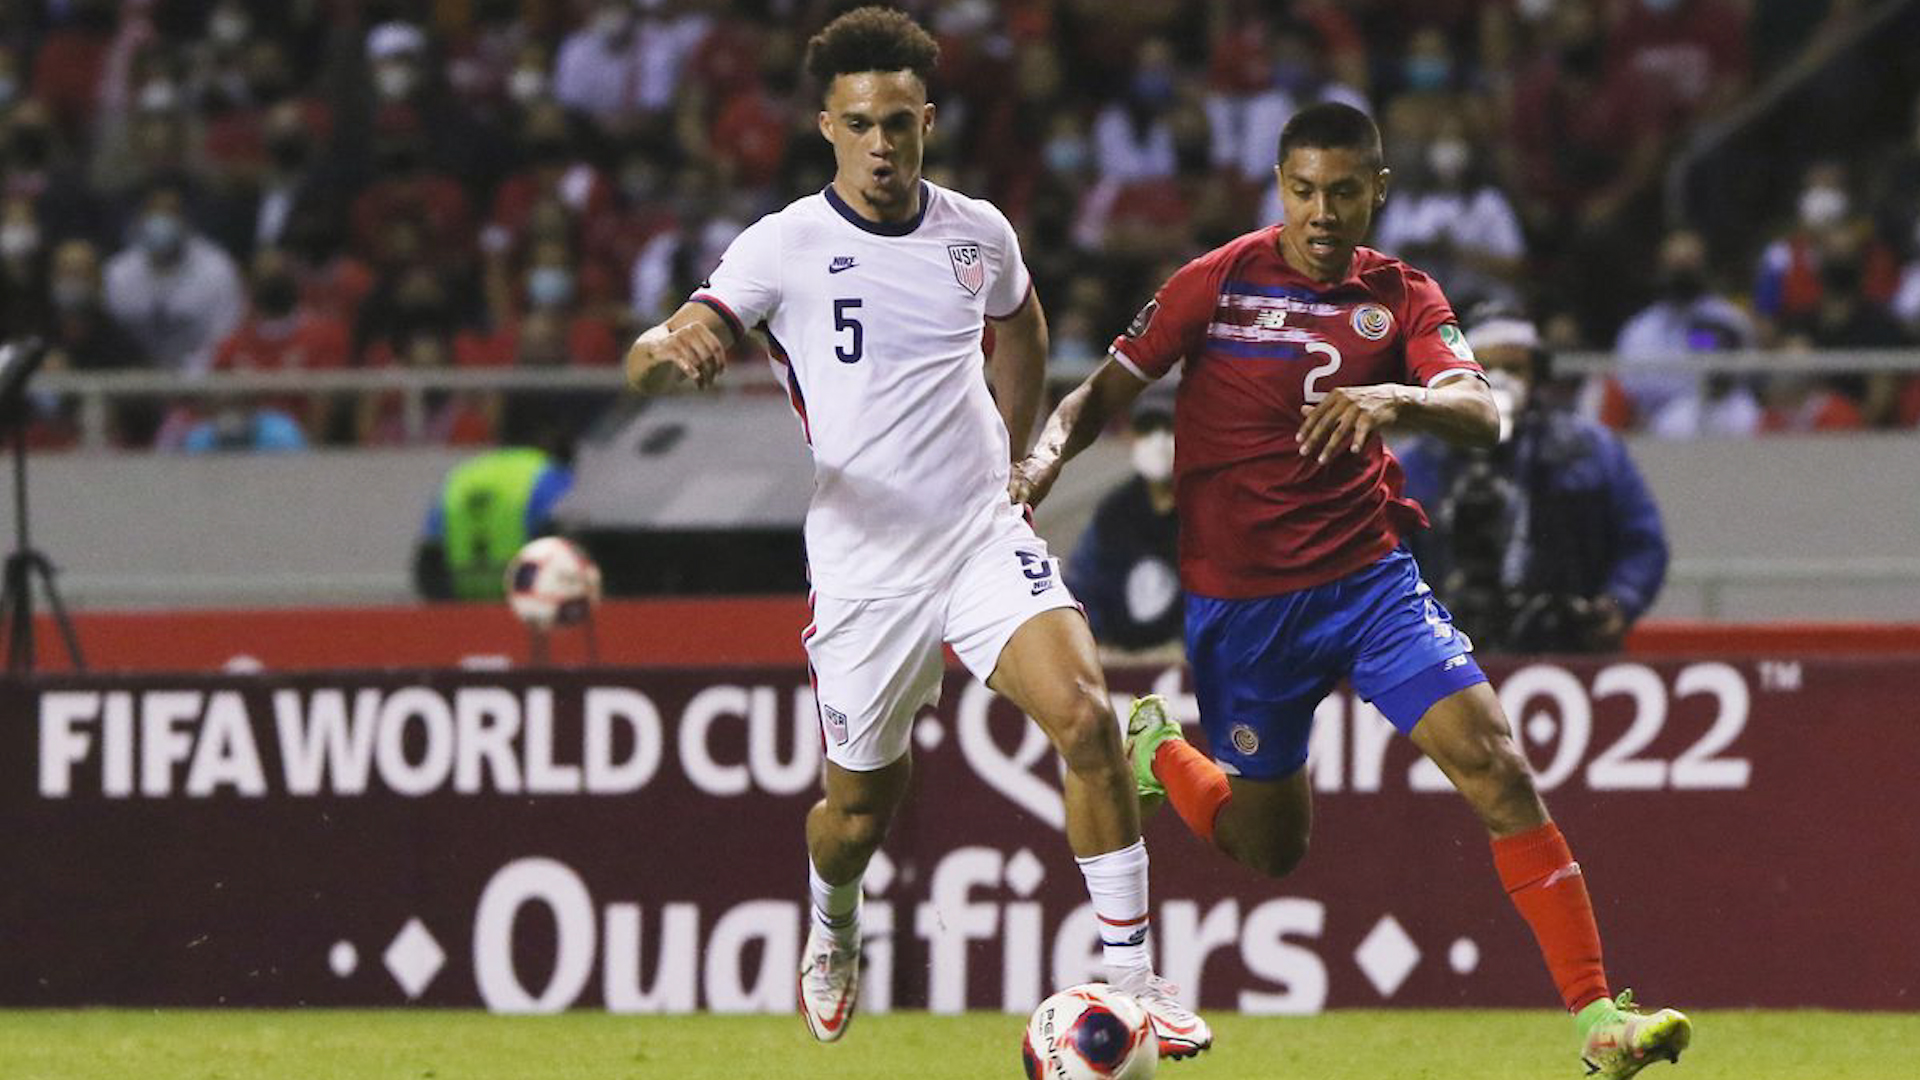 HIGHLIGHT WORLD CUP QUALIFIERS COSTA RICA VS USA 2-0